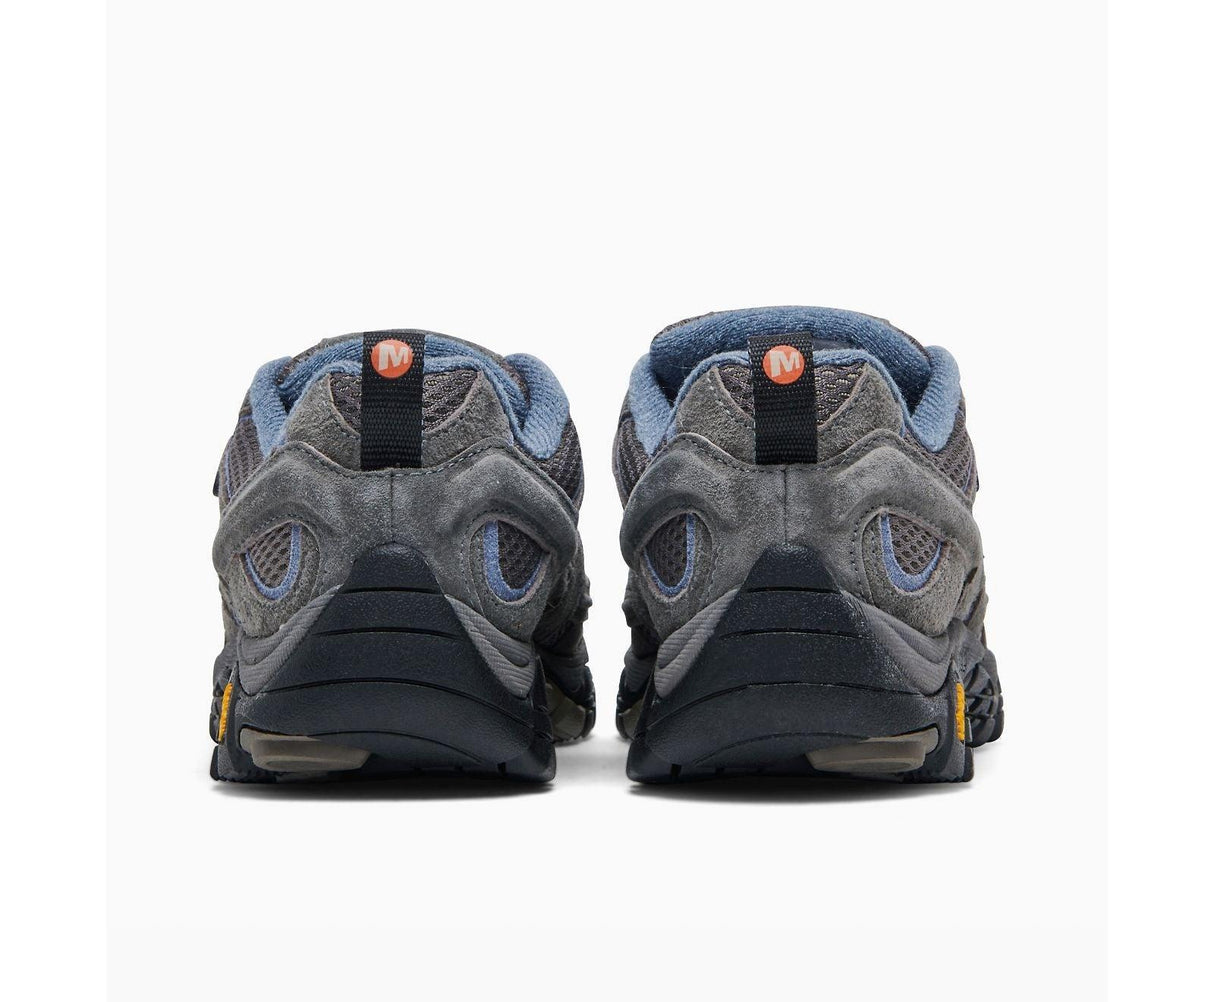 Merrell Women's Moab 2 WTPF Shoes Wide - A&M Clothing & Shoes